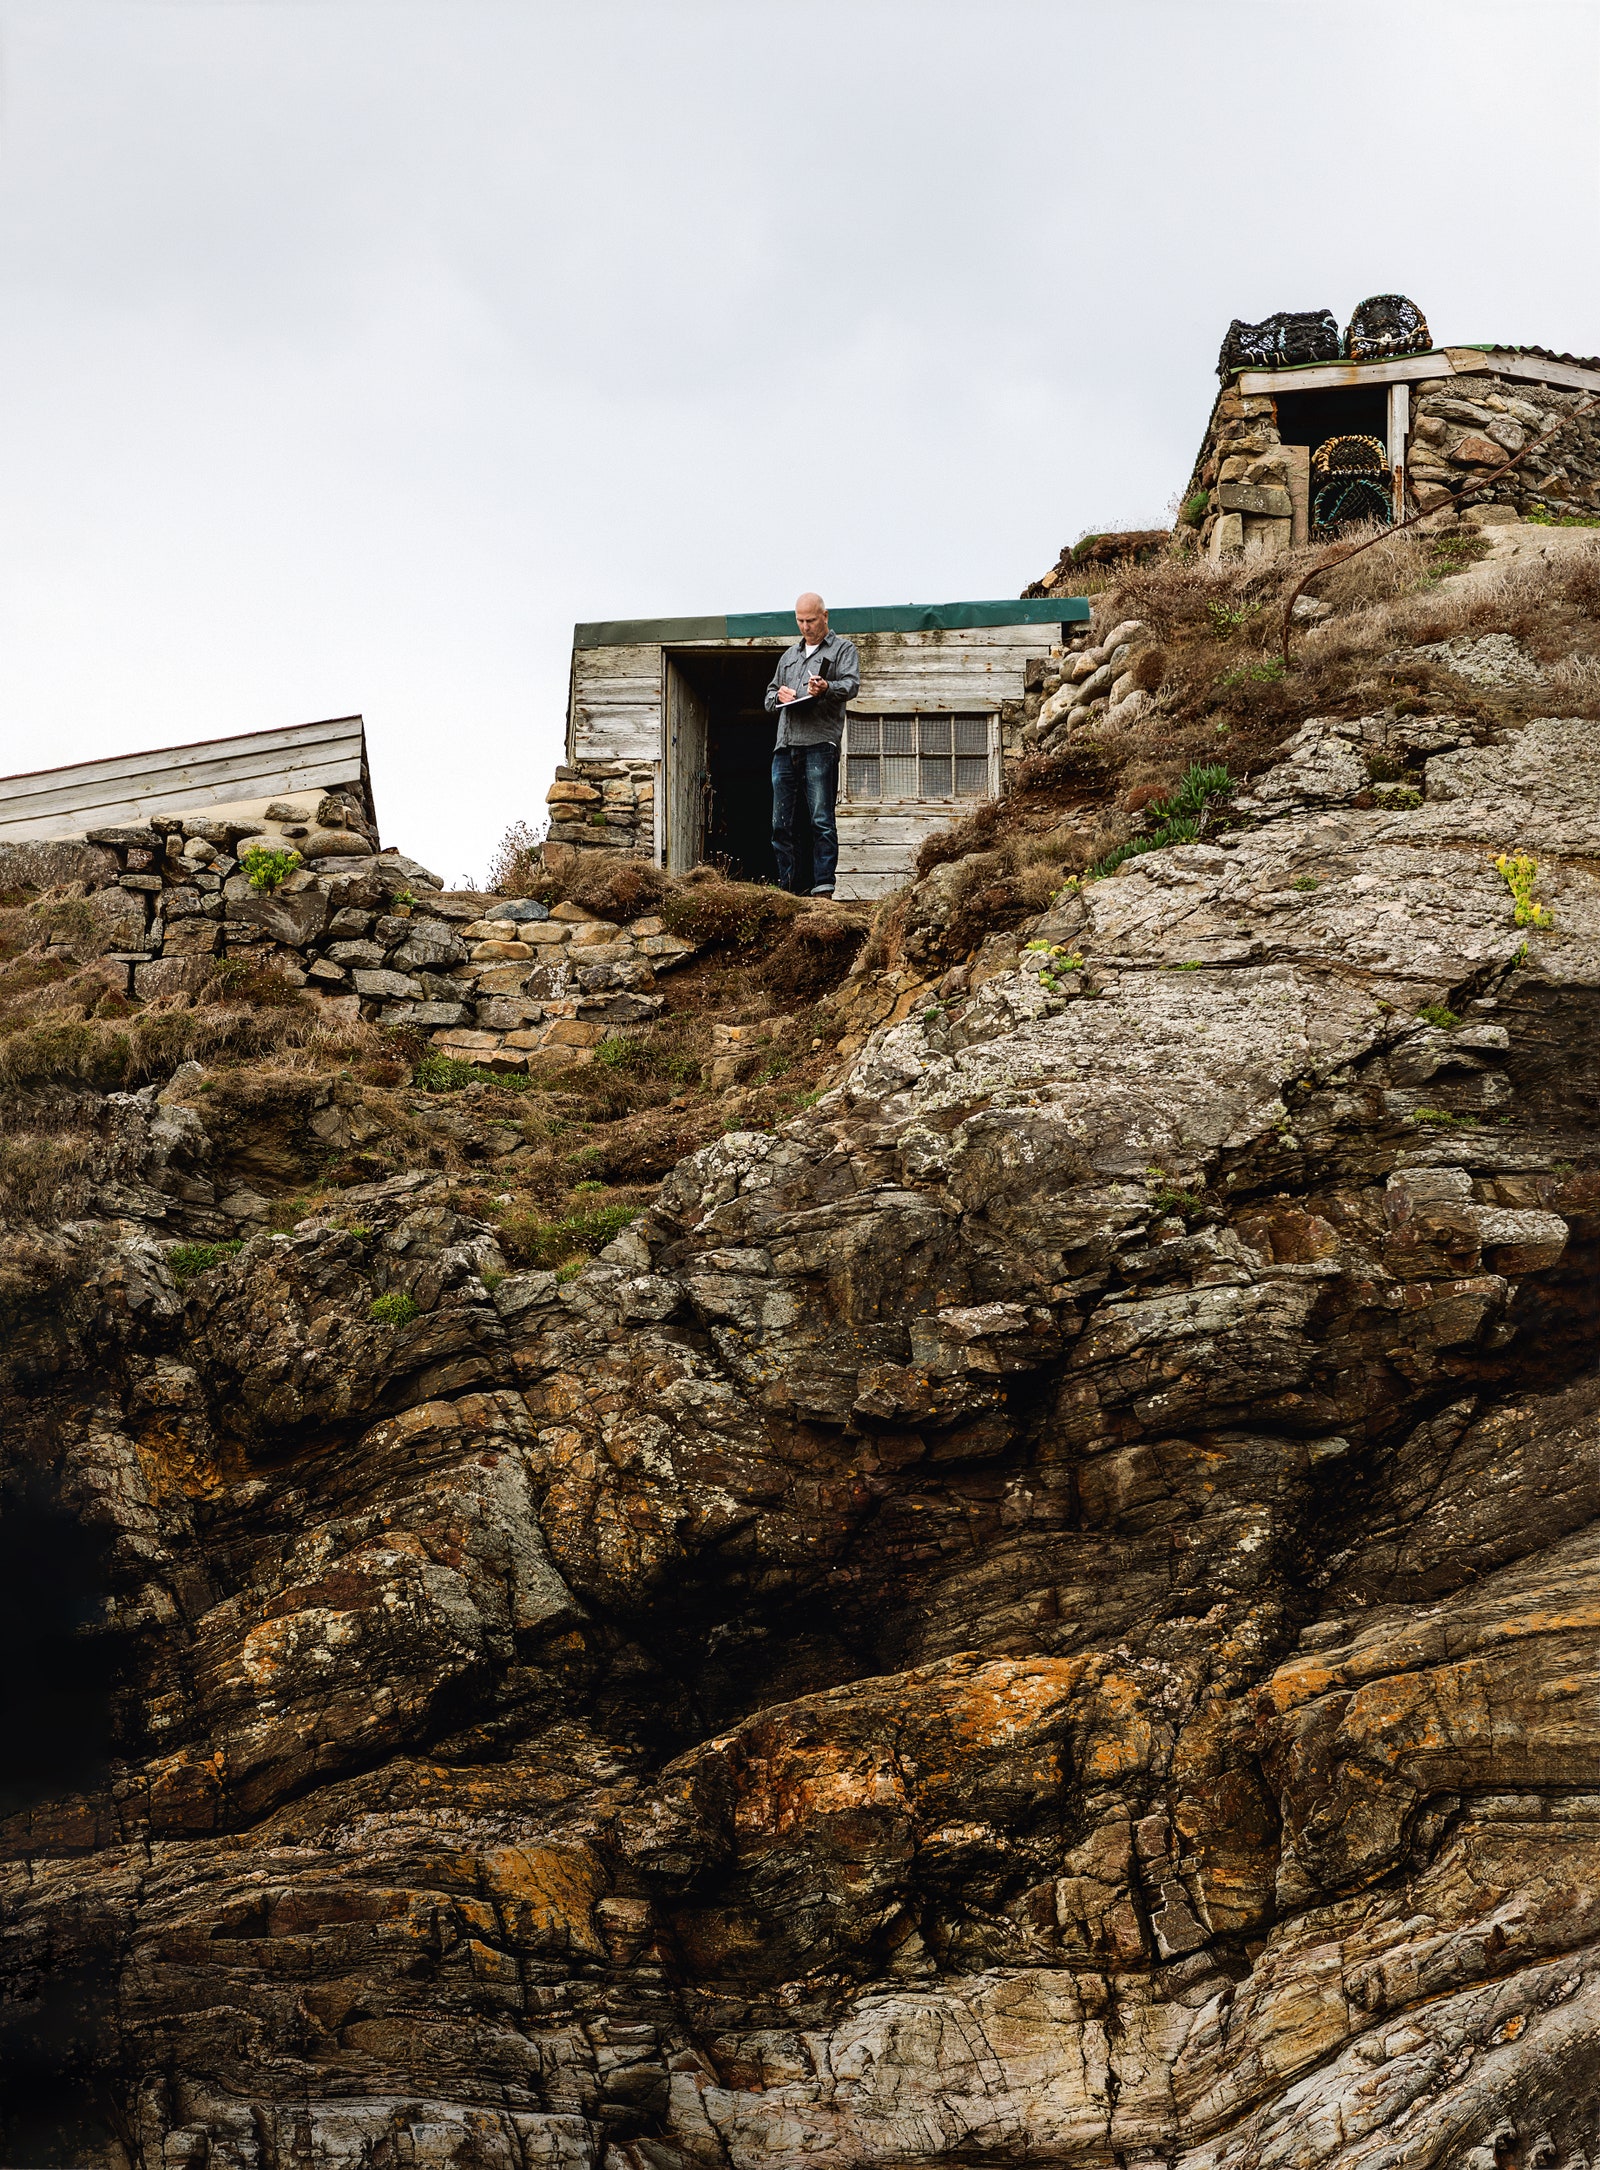 Artist Kurt Jackson outside the clifftop hut that he uses as a studio near St Just in Cornwall